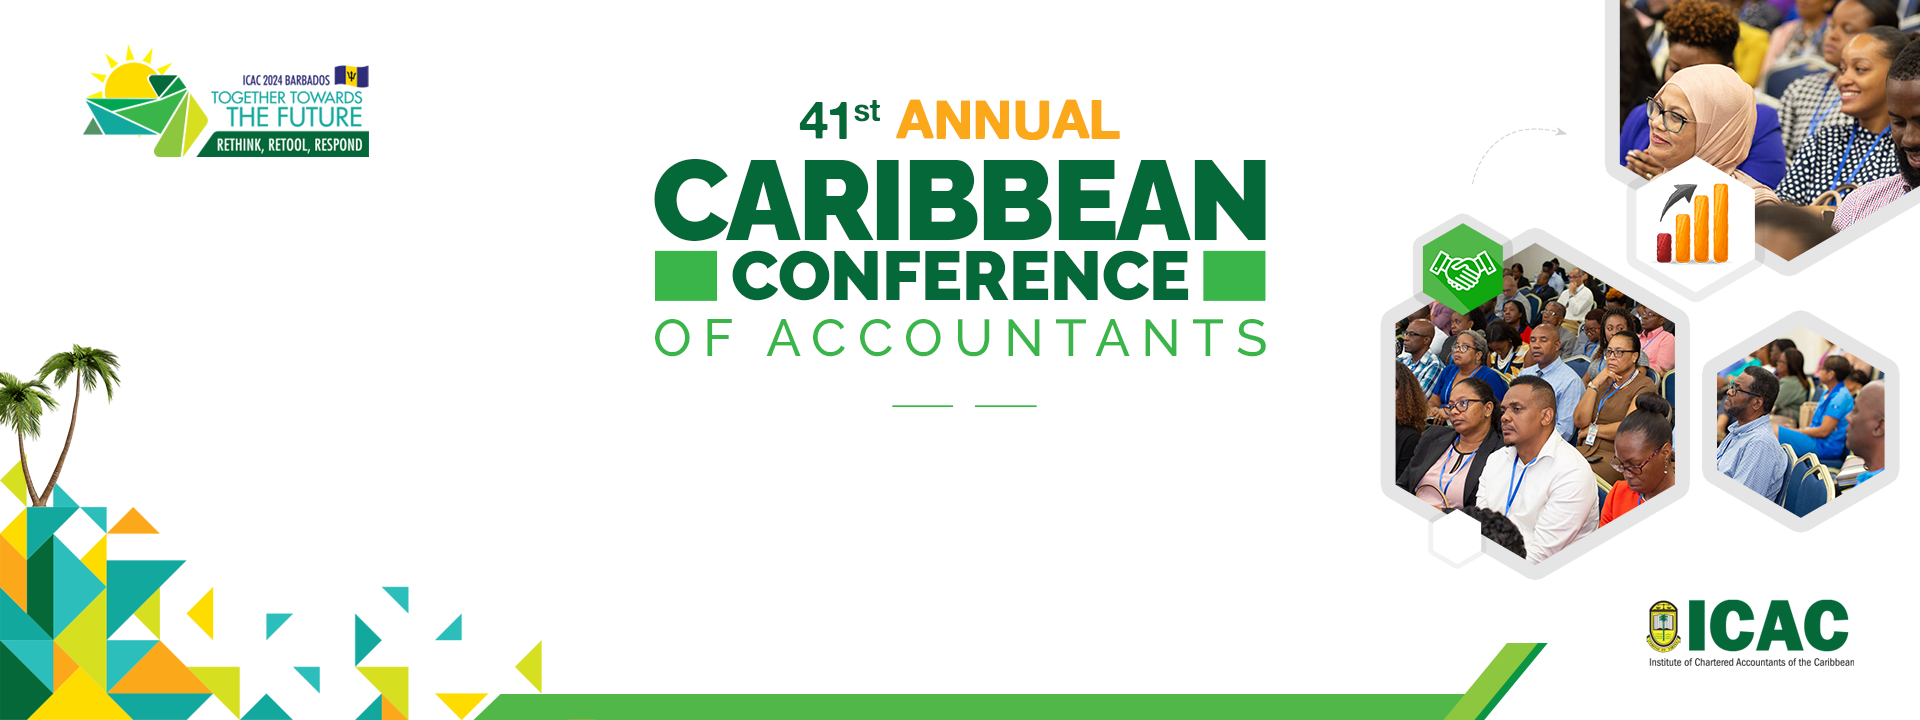 The Conference for Accountants ICAC Caribbean Conference of Accountants